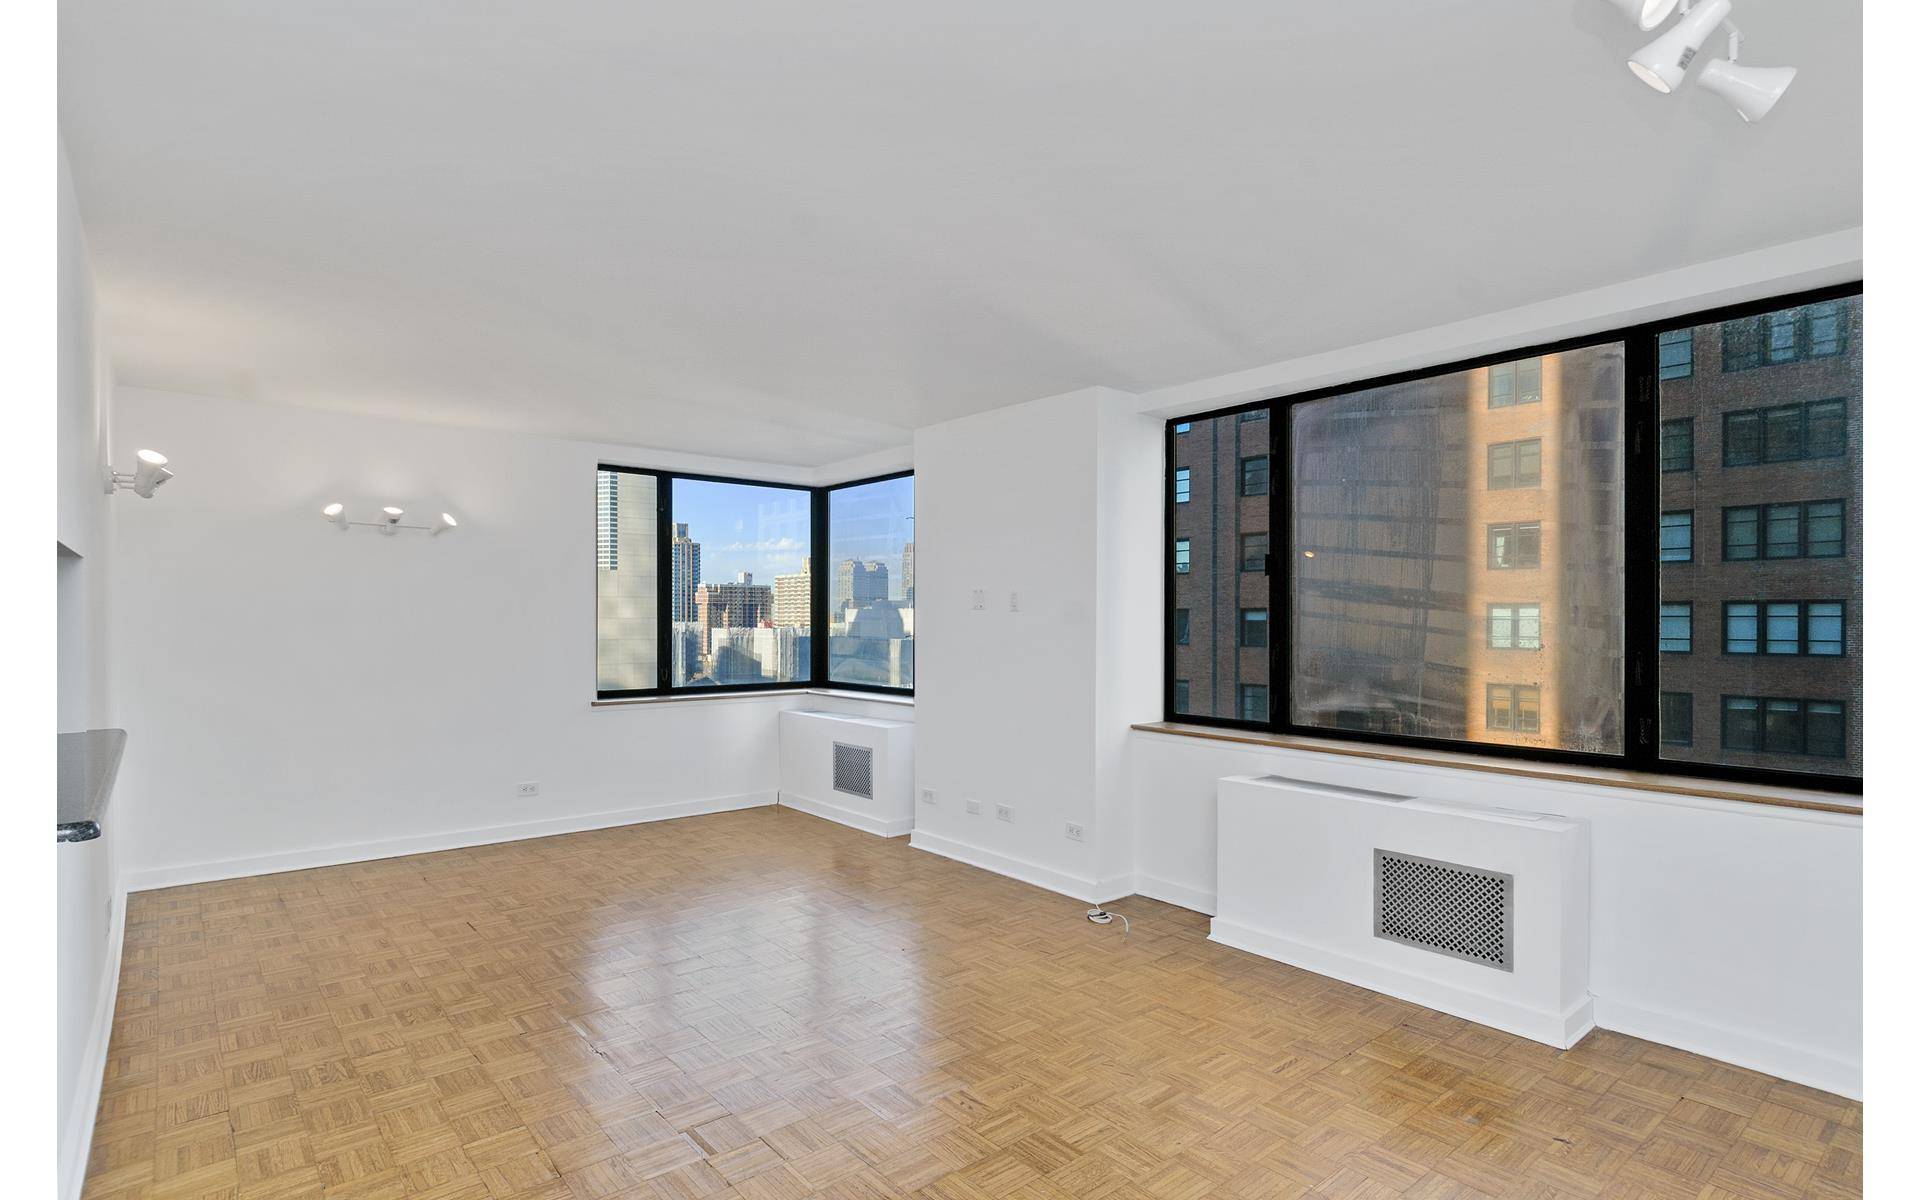 Located in the heart of culturally dynamic and thriving Lincoln Center, this stunning convertible 3 bed 2 bath corner unit will inspire you upon first visit.